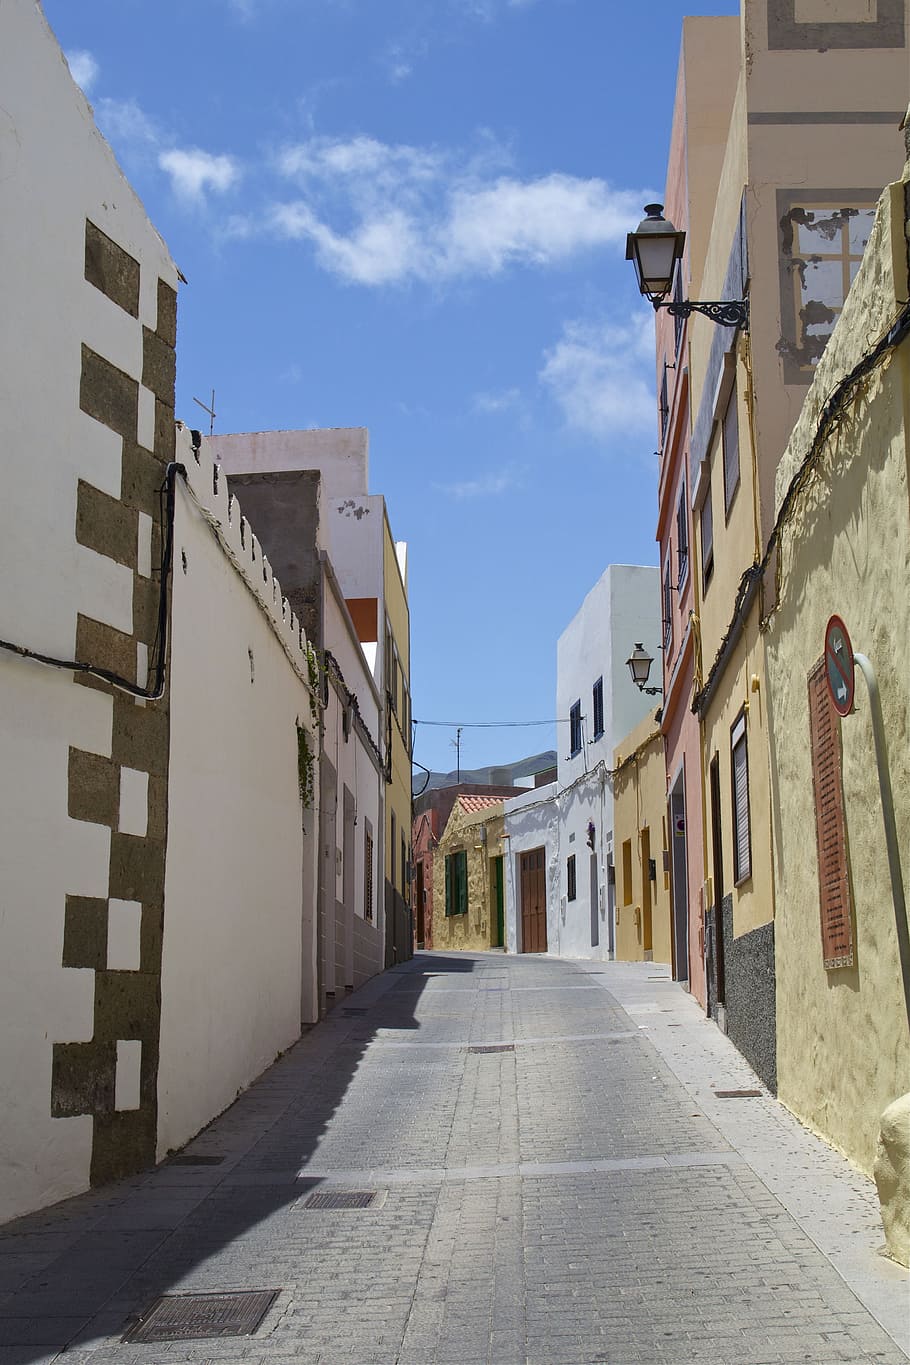 aguimes, gran canaria, alley, away, architecture, paved road, road, village street, building, homes